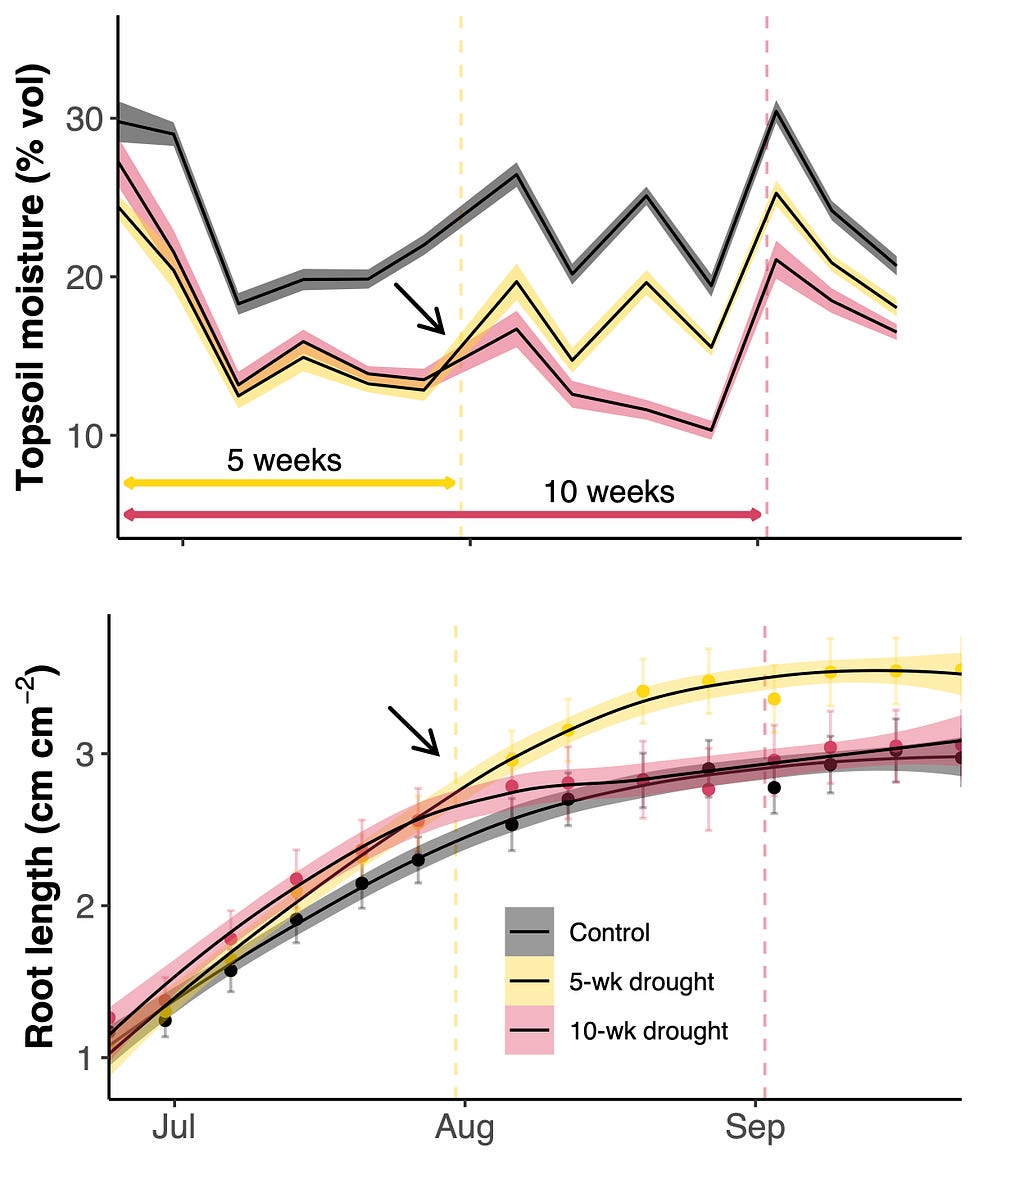 A figure showing data from summer 2020. One line for each treatment: 10-wk drought (red), 5-wk drought (yellow) an controls.